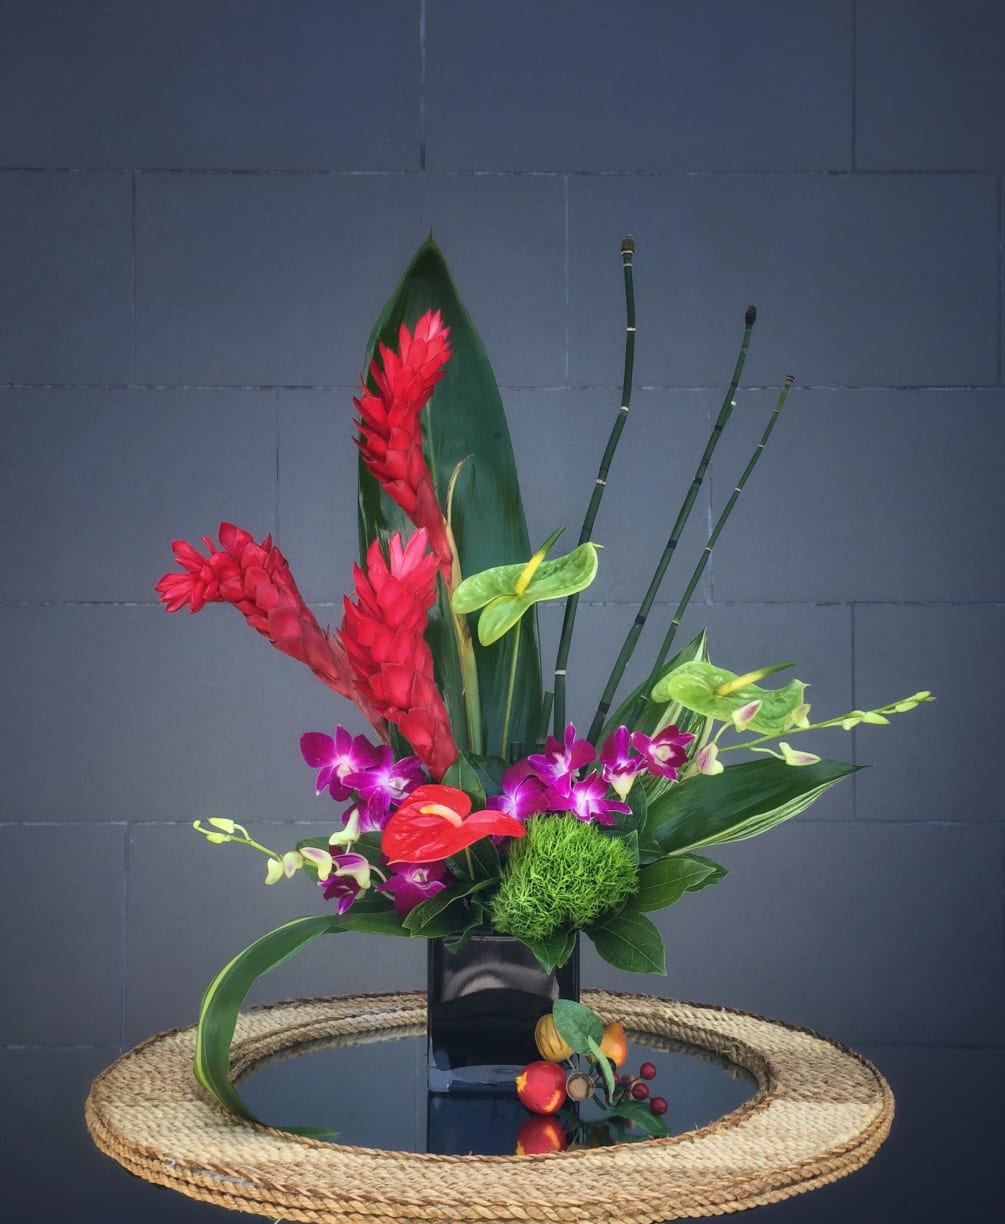 Tropical design including red ginger, anthurium, dendro orchid and nice accents.
STANDARD: FIRST